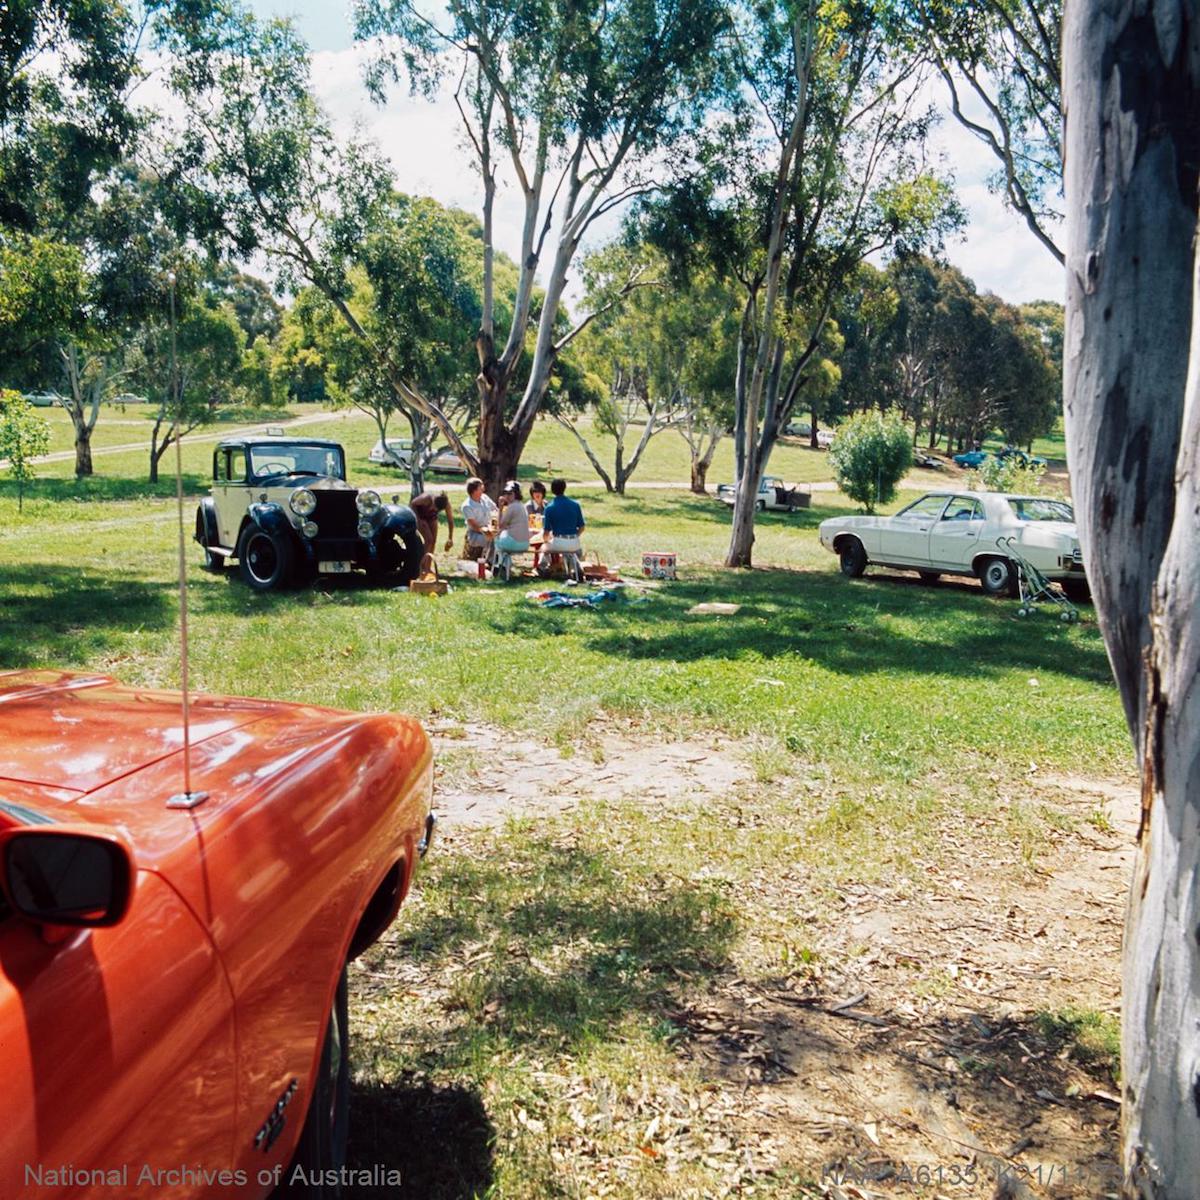 Picture shows a family picnicking at Weston Park. They are sitting at a picnic table under some shady eucalyptus trees. Nearby is a vintage car.